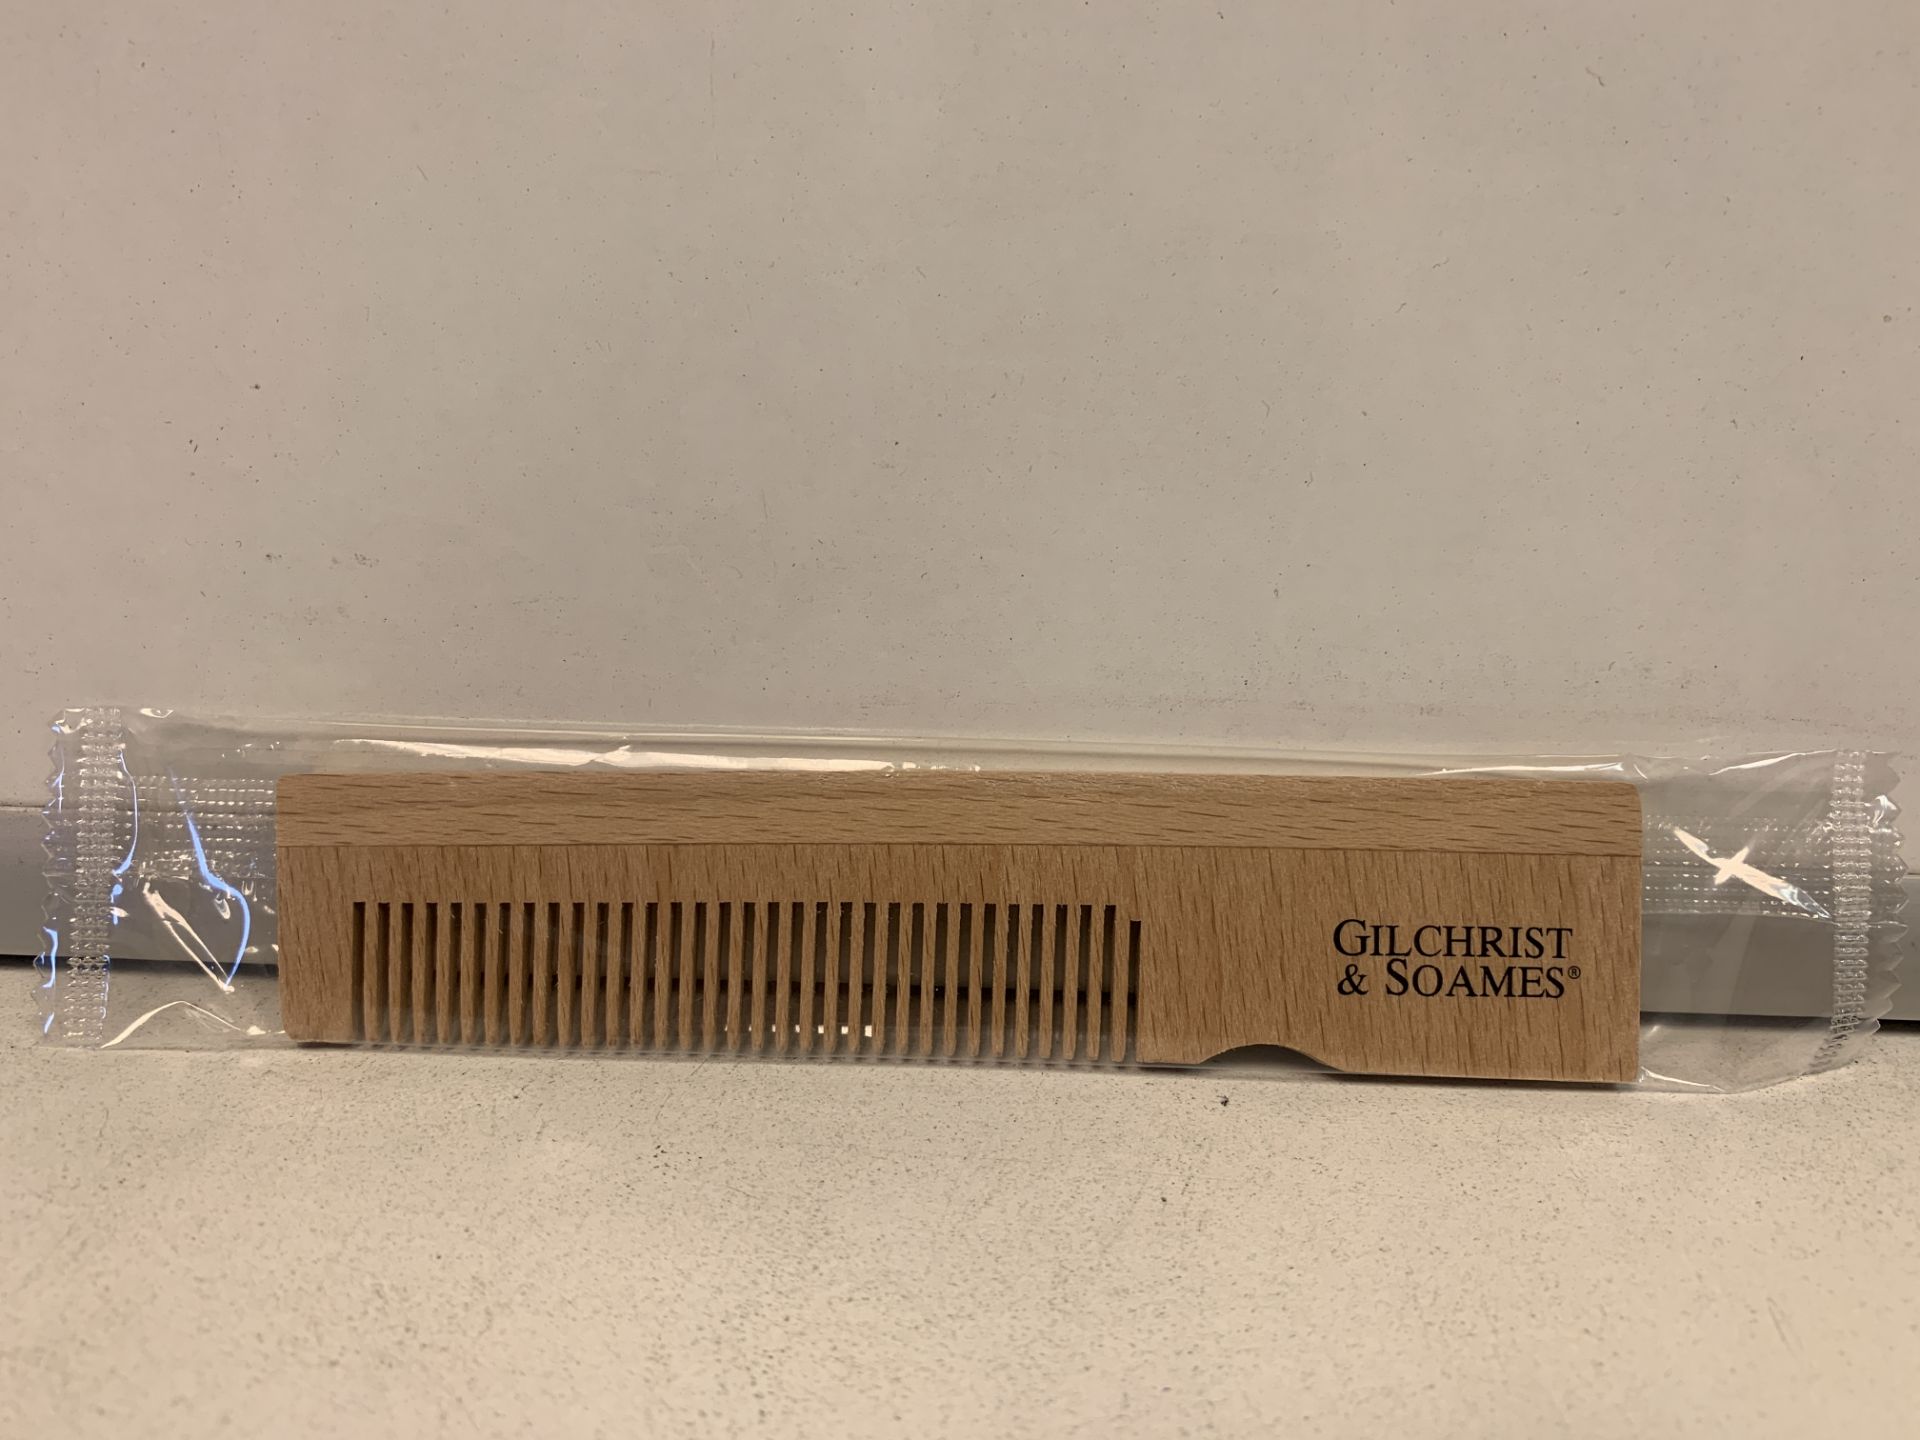 1000 X BRAND NEW GILCHRIST AND SOAMES WOODEN HANDLED COMB WITH LOGO